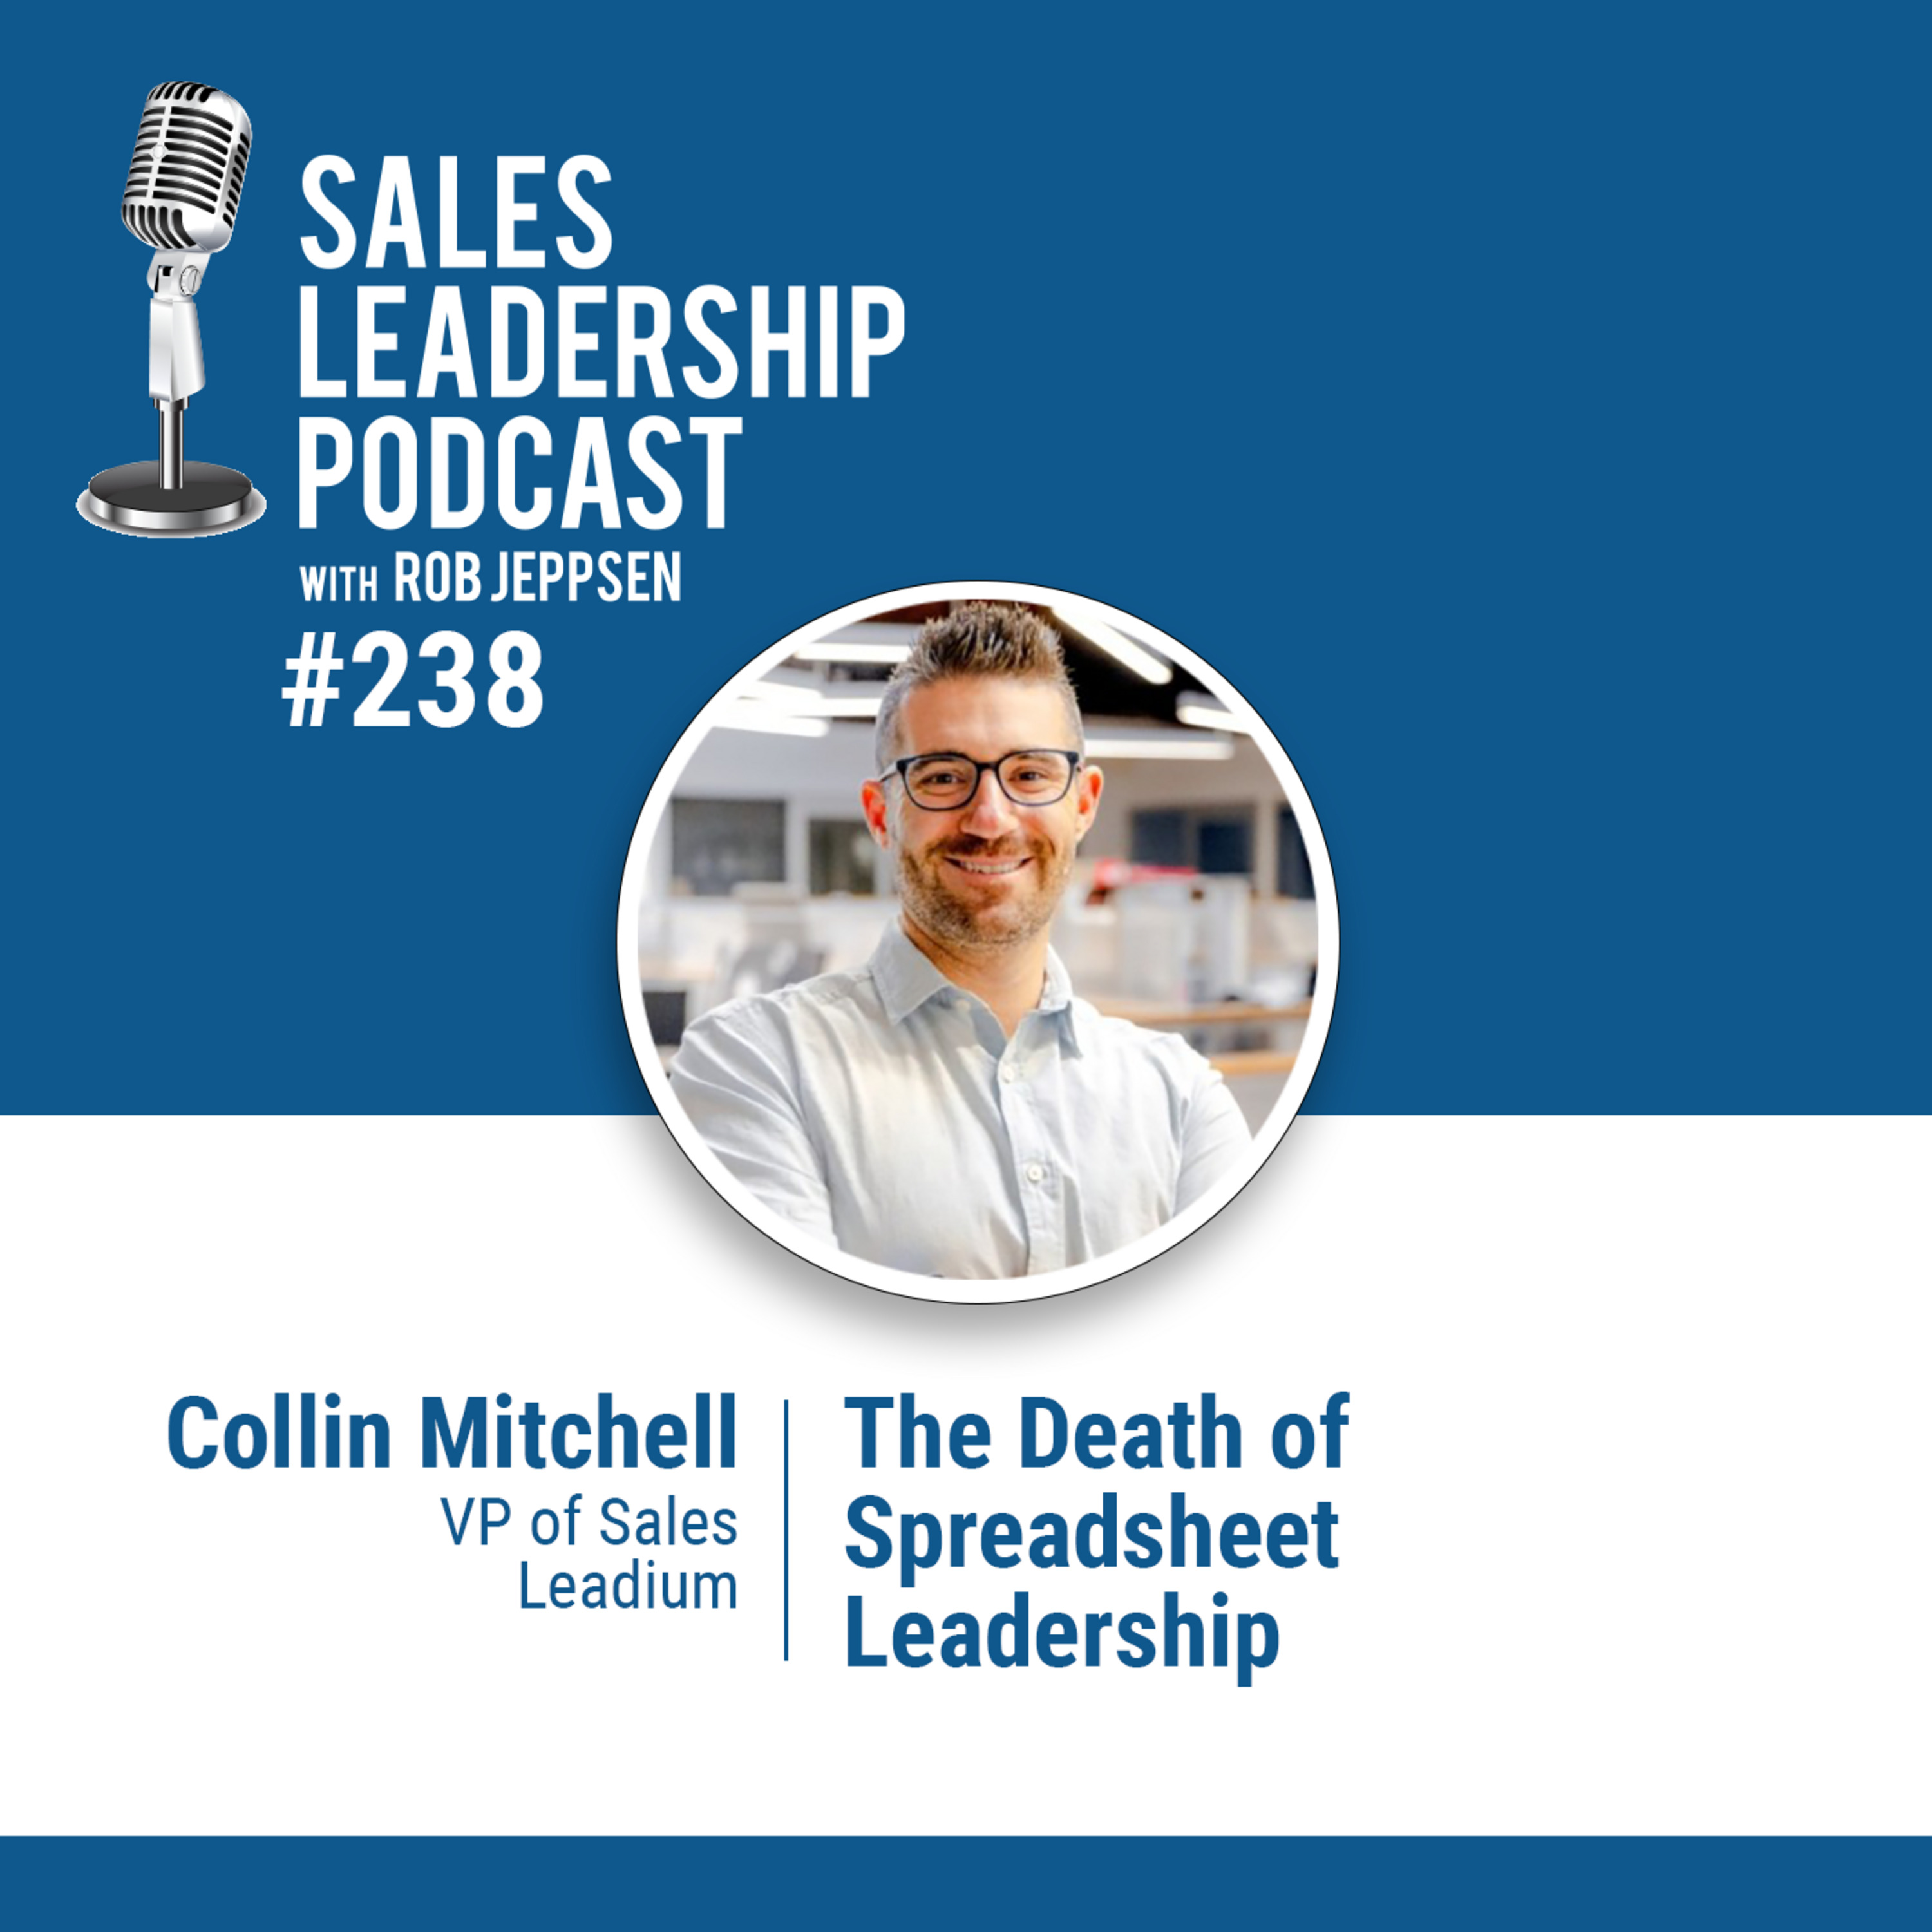 Episode 238: Collin Mitchell, VP of Sales at Leadium: The Death of Spreadsheet Leadership